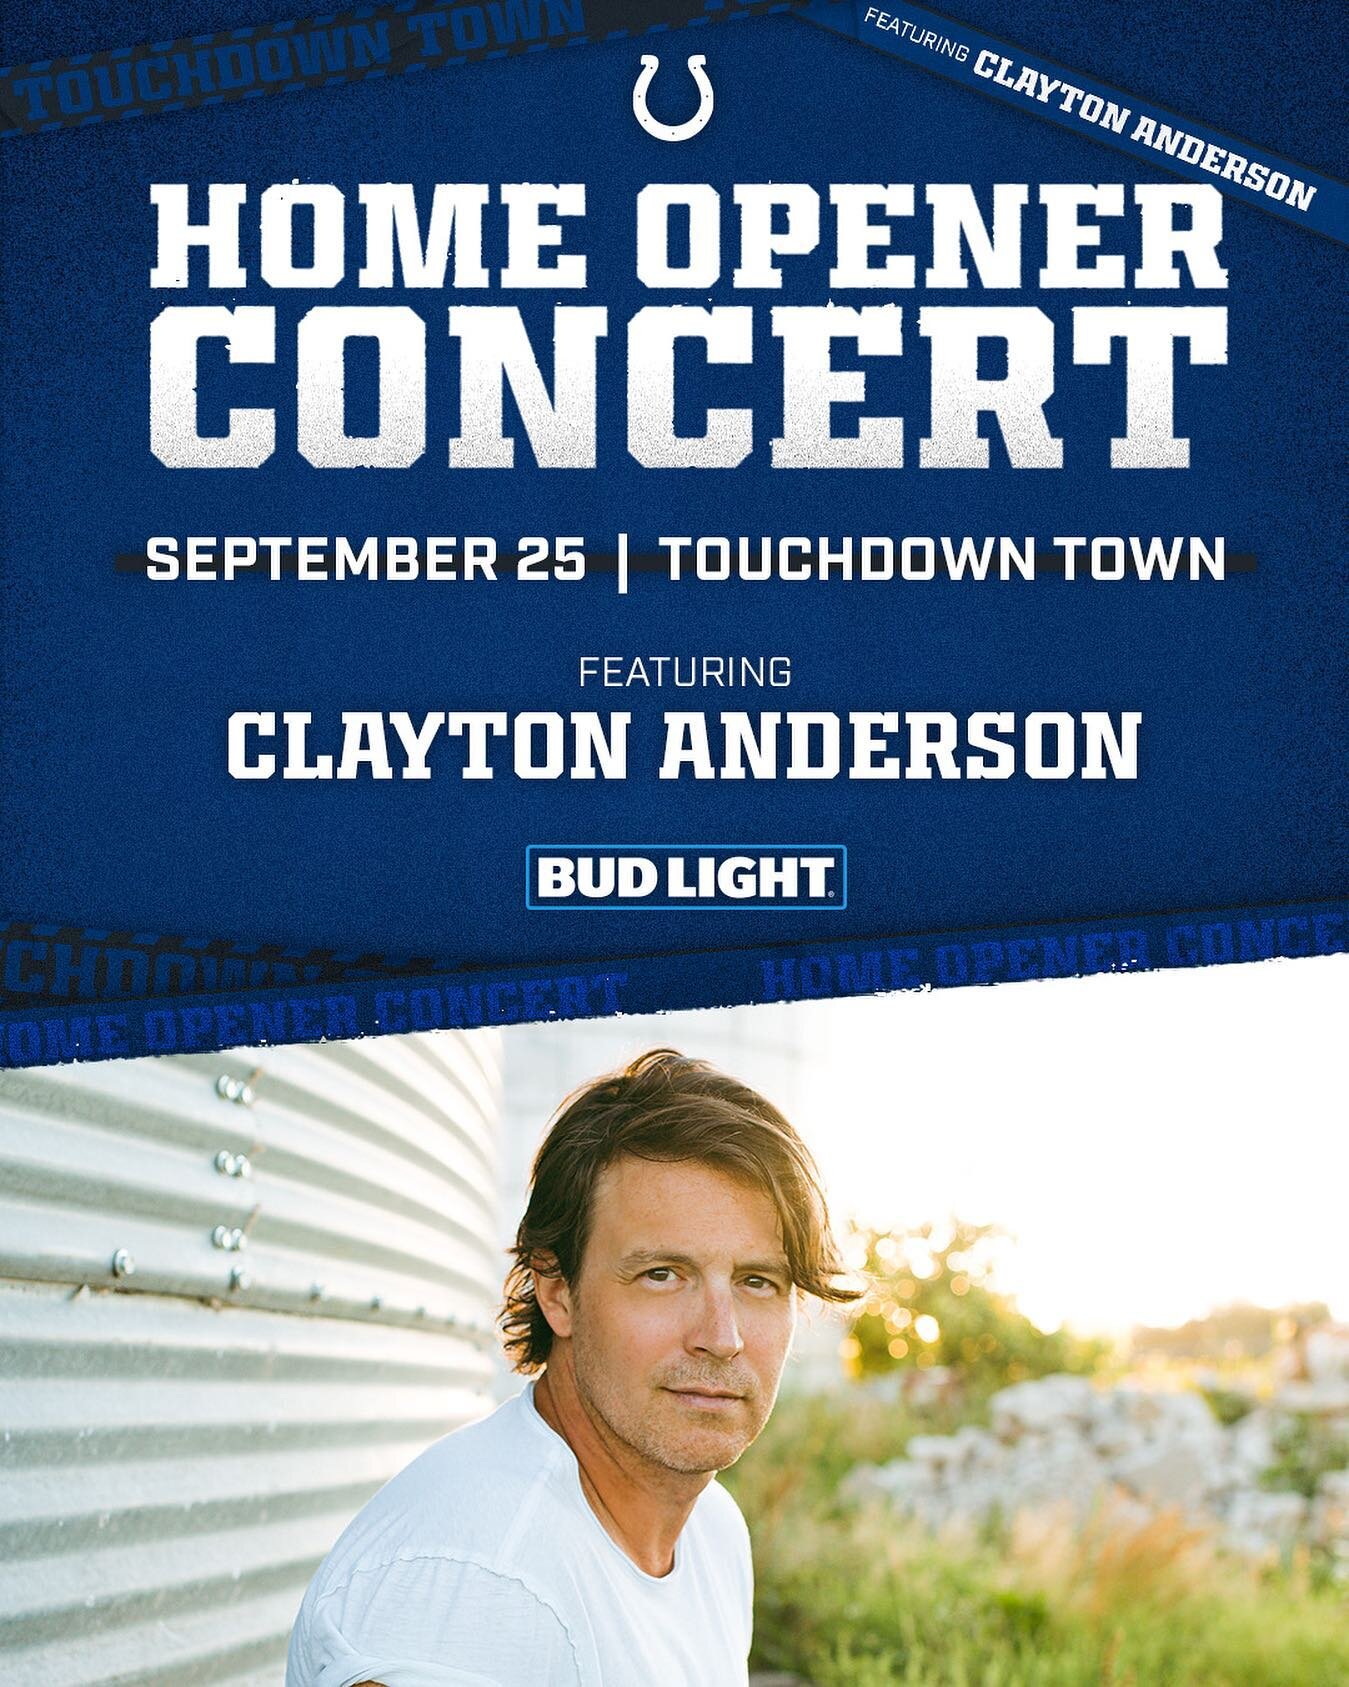 Let&rsquo;s go @colts fans! Come celebrate the sept 25th Home Opener against the chiefs with me! 10a in Touchdown Town ⚡️